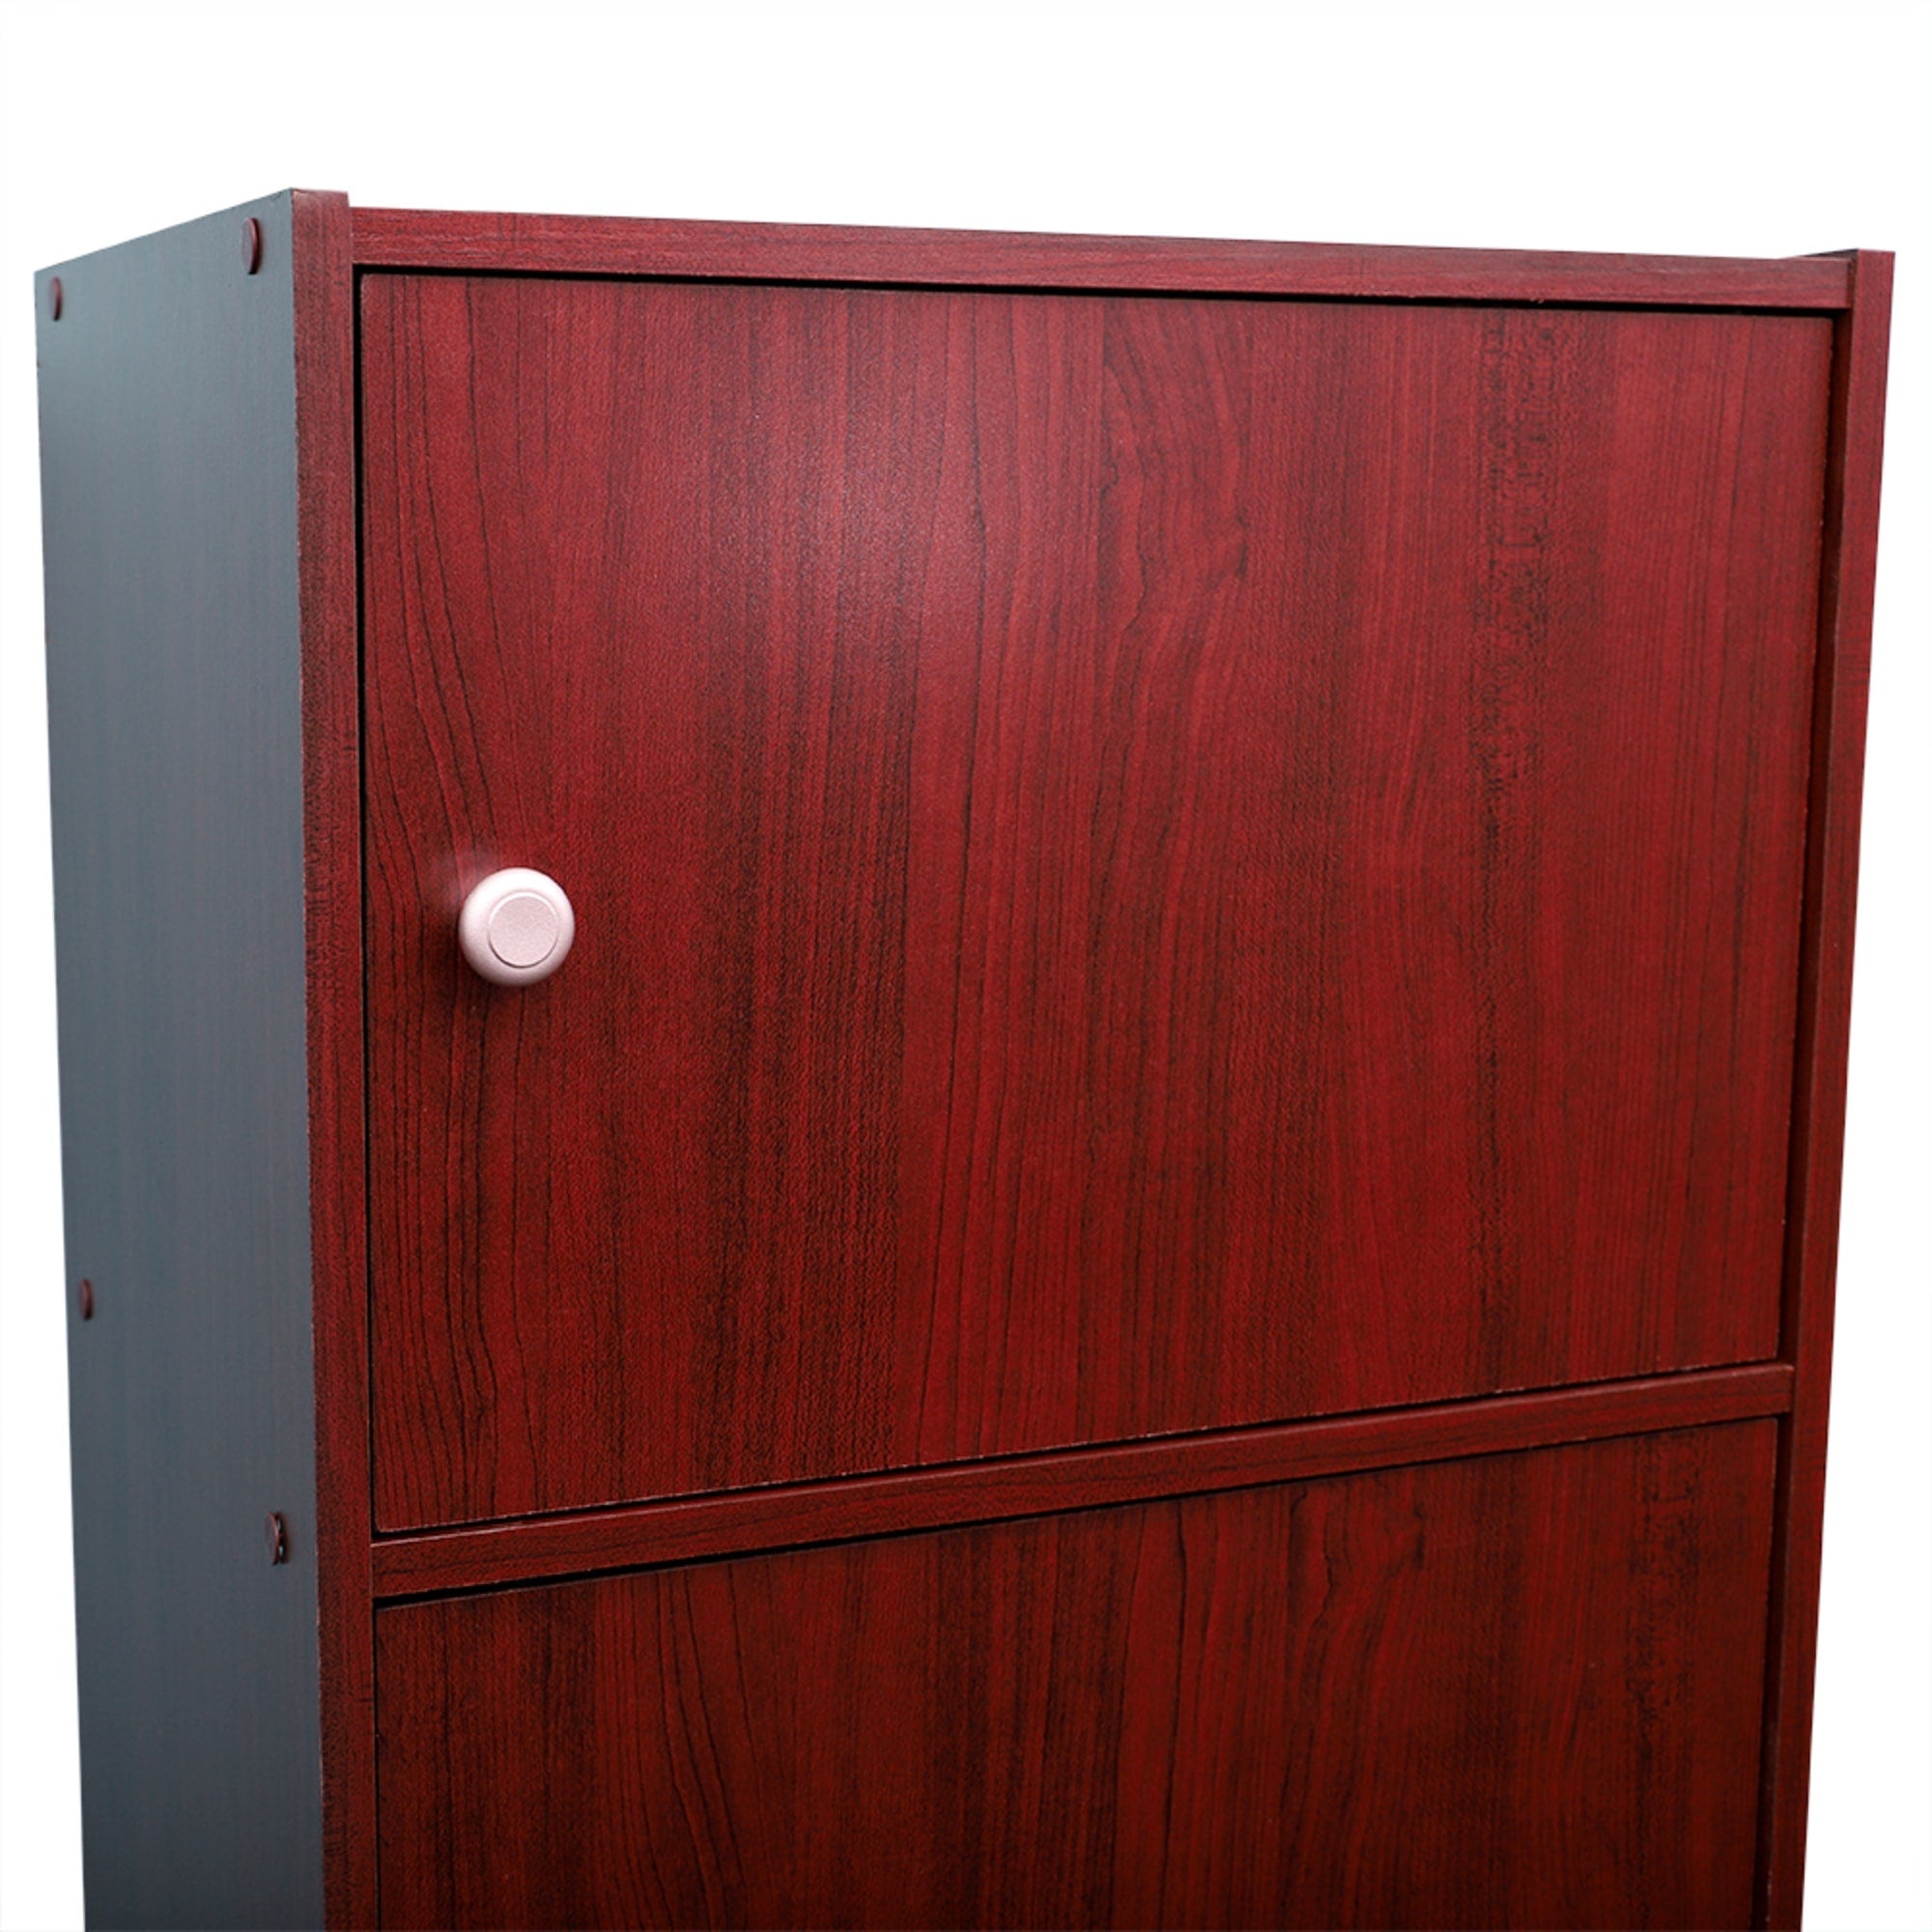 Home Basics 6 Cube Cabinet, Mahogany $80.00 EACH, CASE PACK OF 1